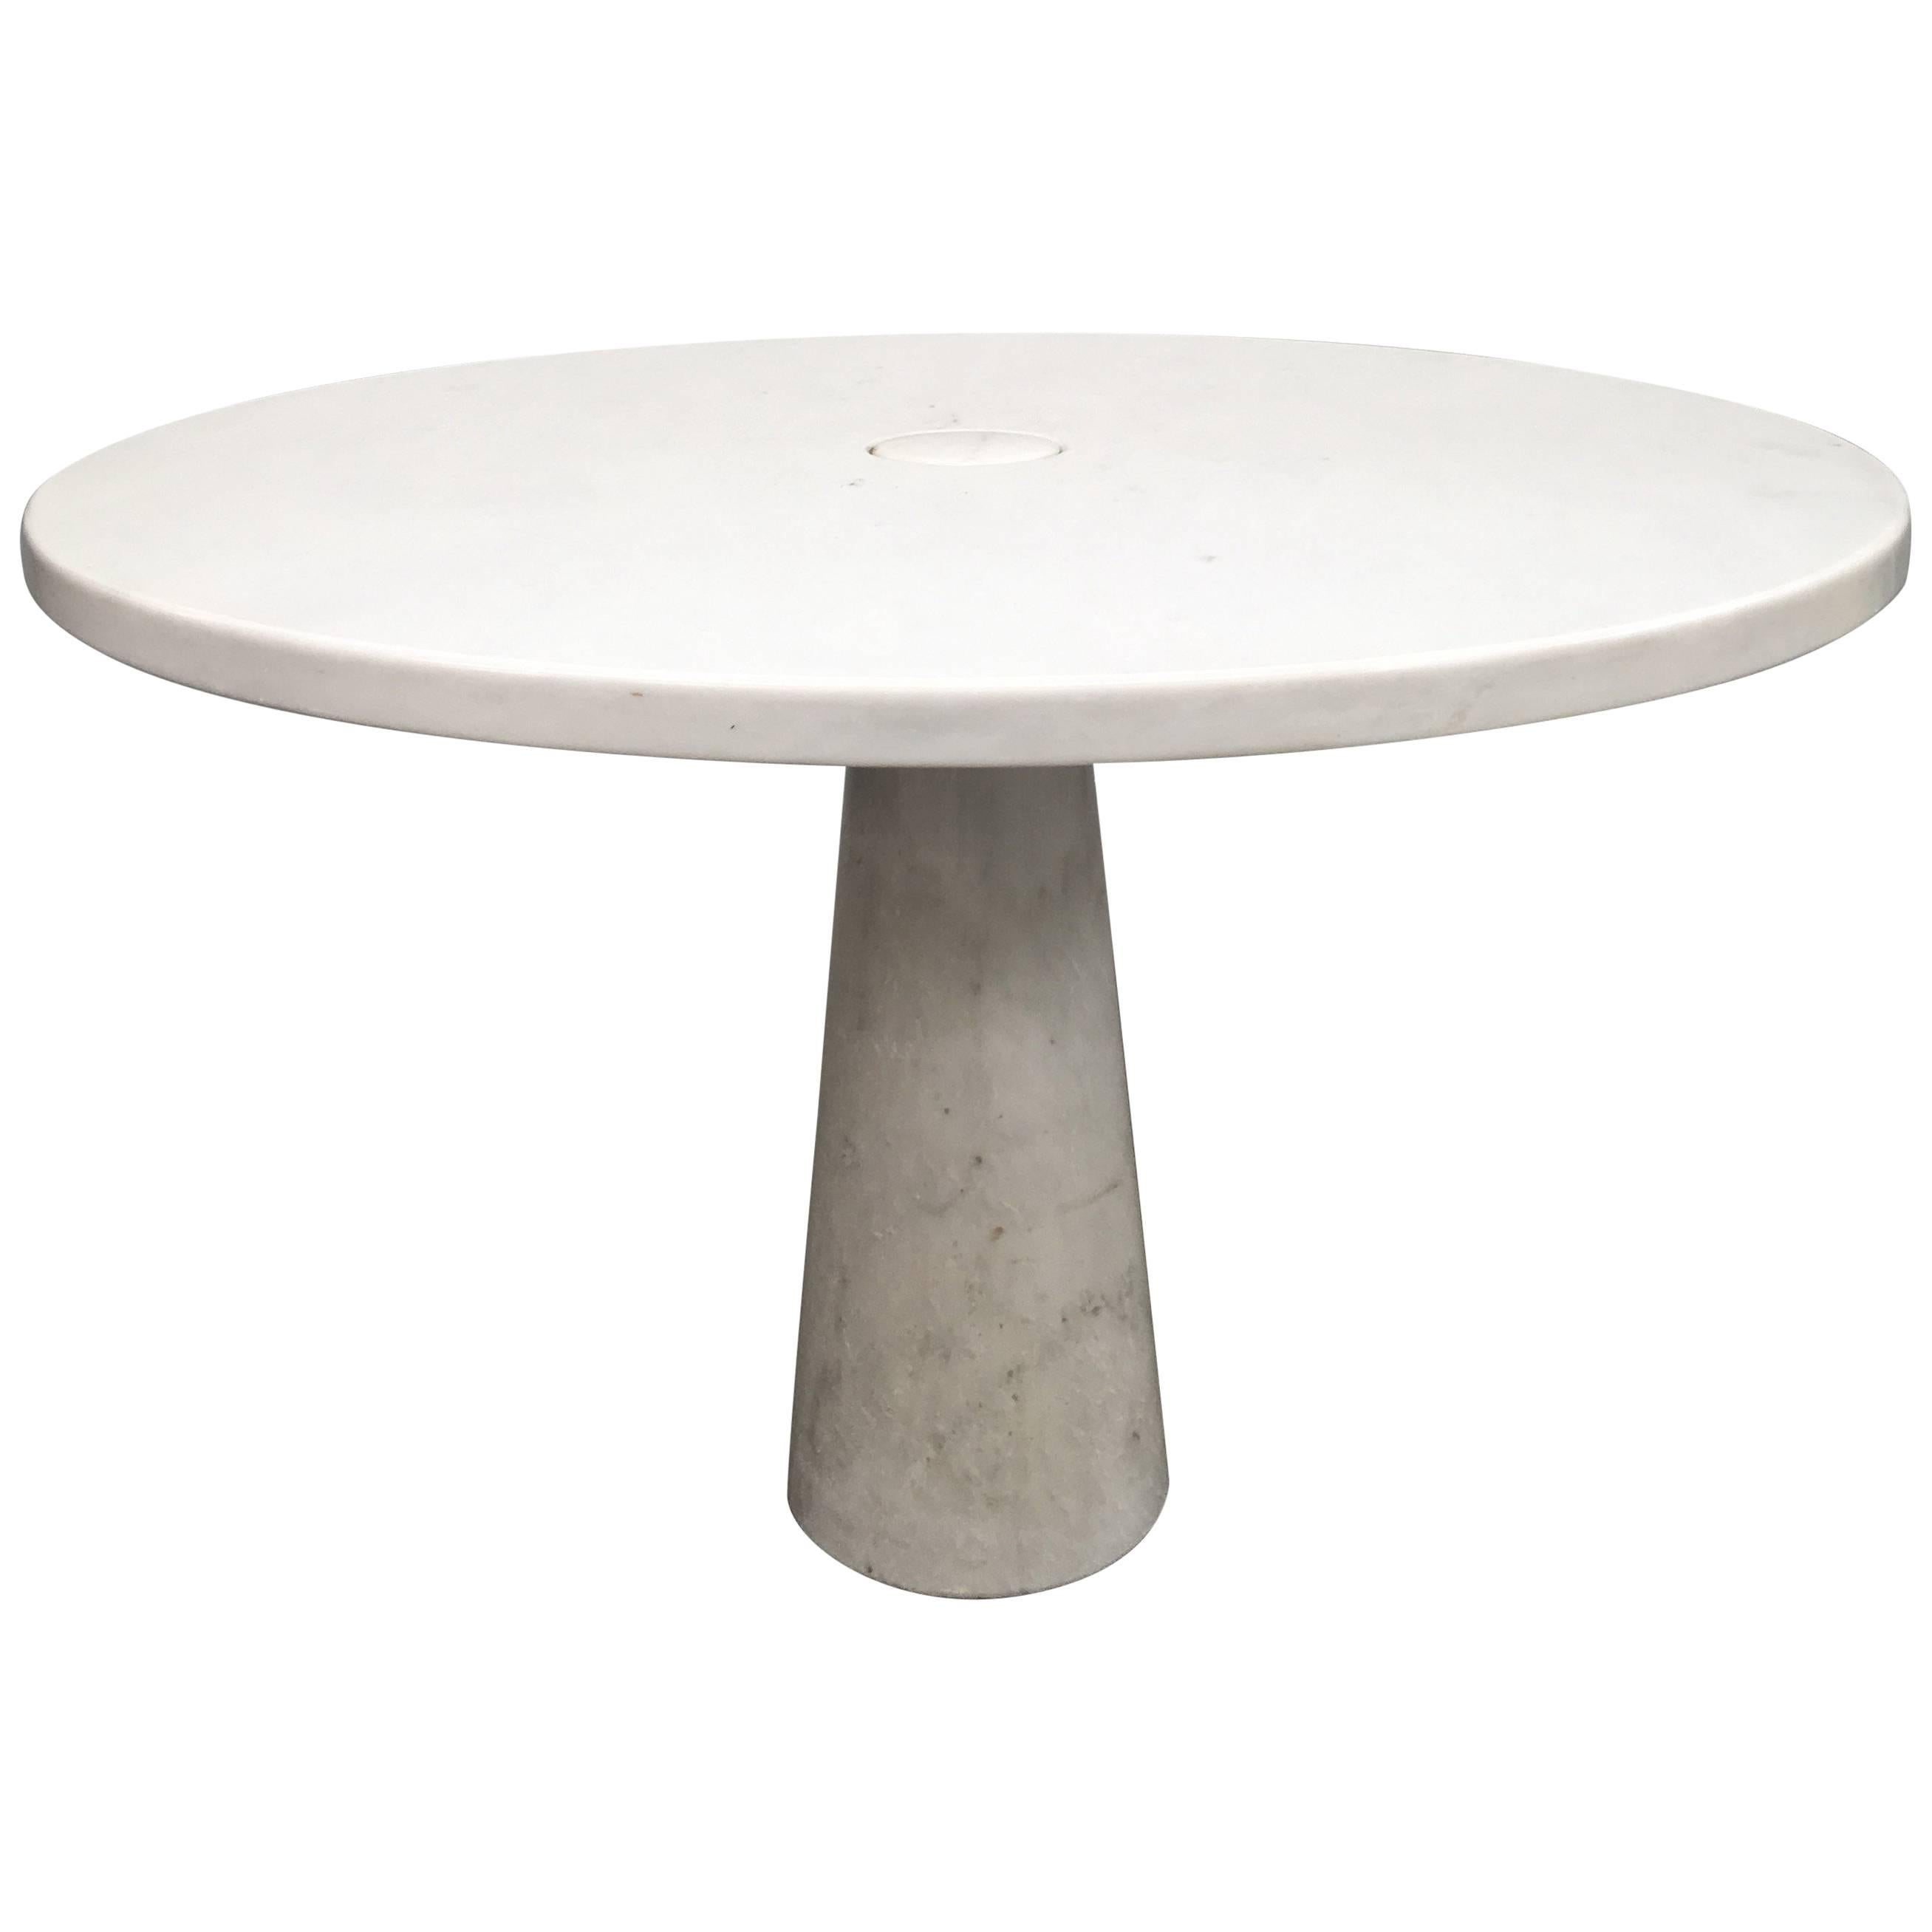 Italian White Marble Centre Table by Angelo Mangiarotti